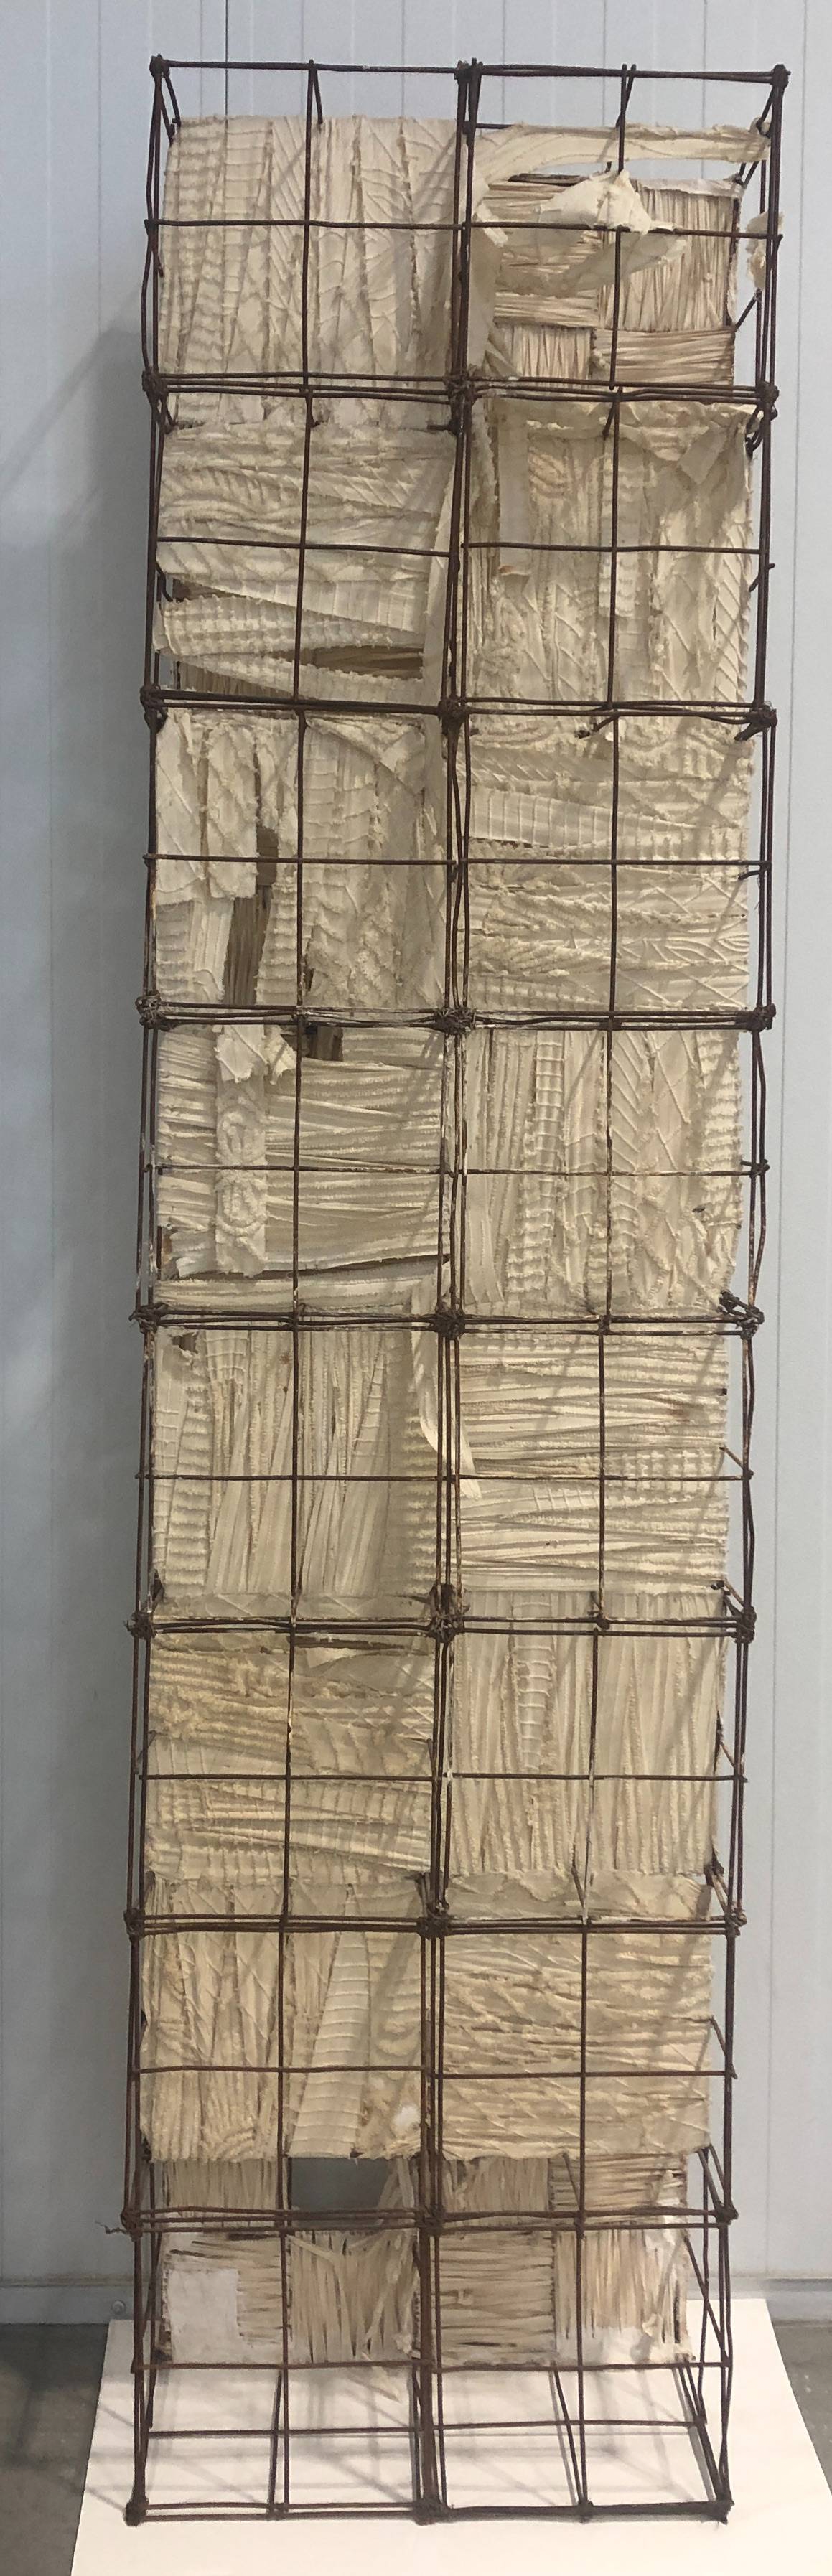 metal scaffold with handmade paper hanging from interior wires